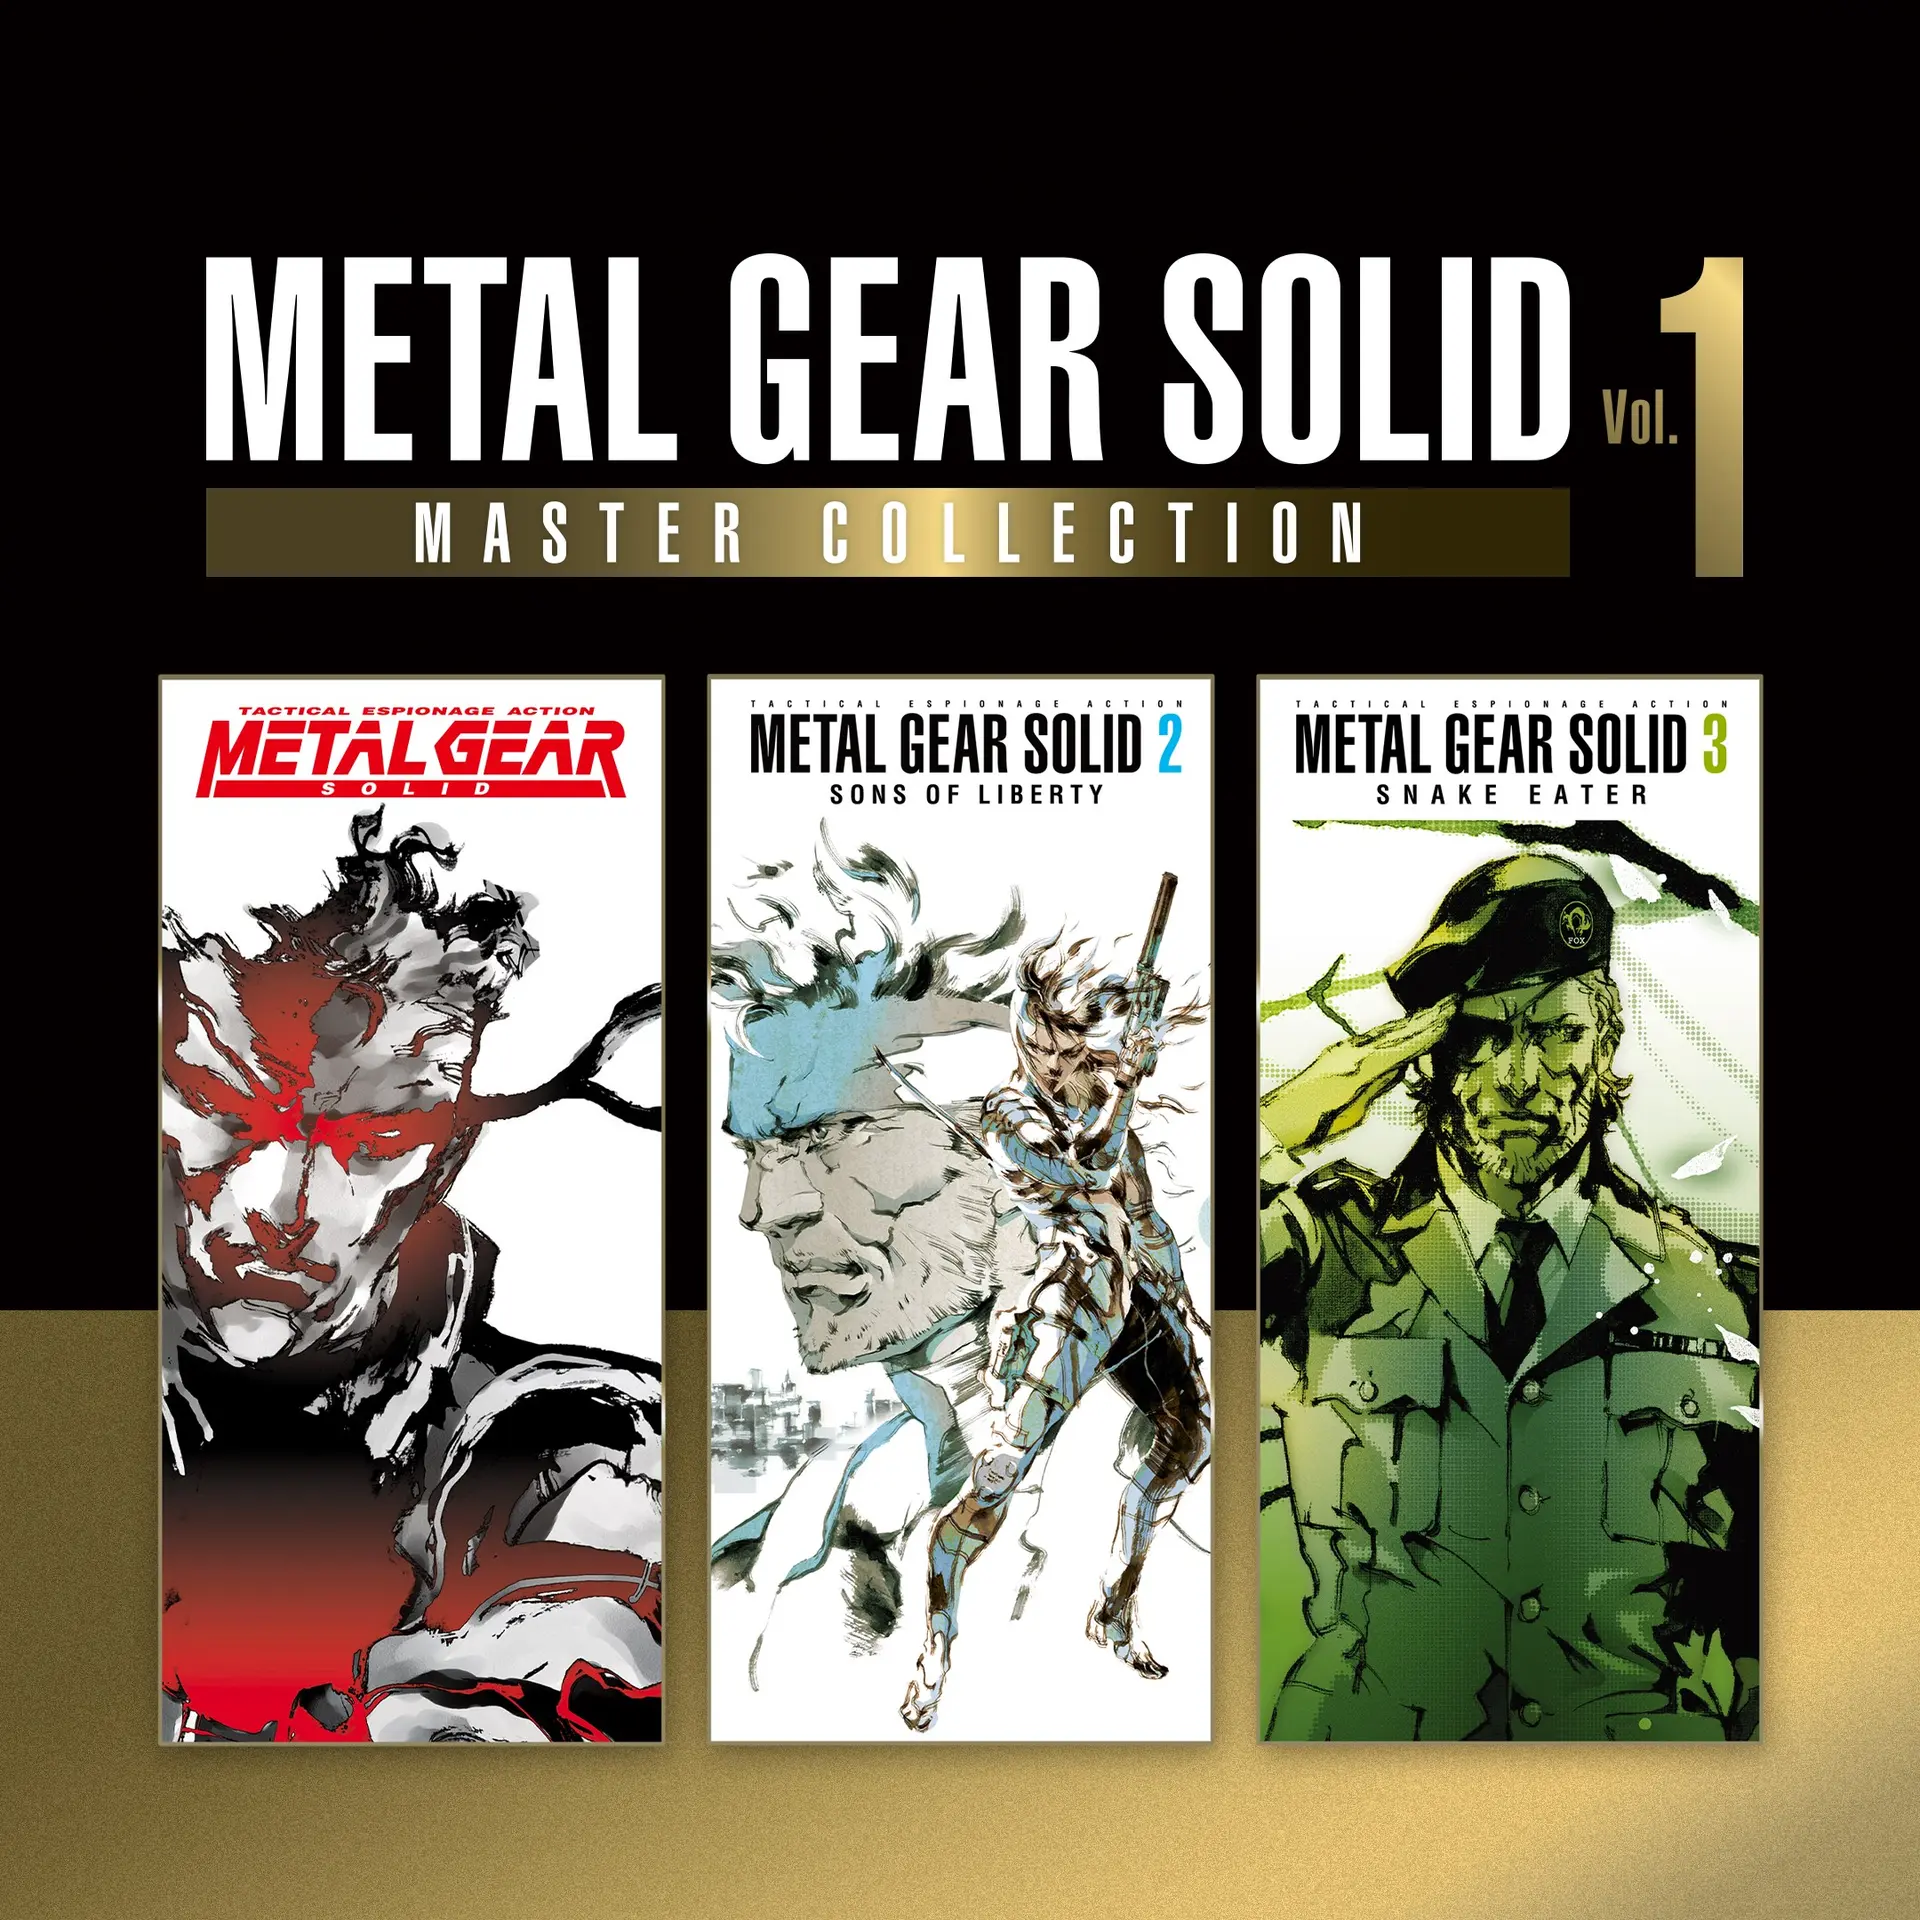 METAL GEAR SOLID: MASTER COLLECTION Vol.1 (Xbox Games US)